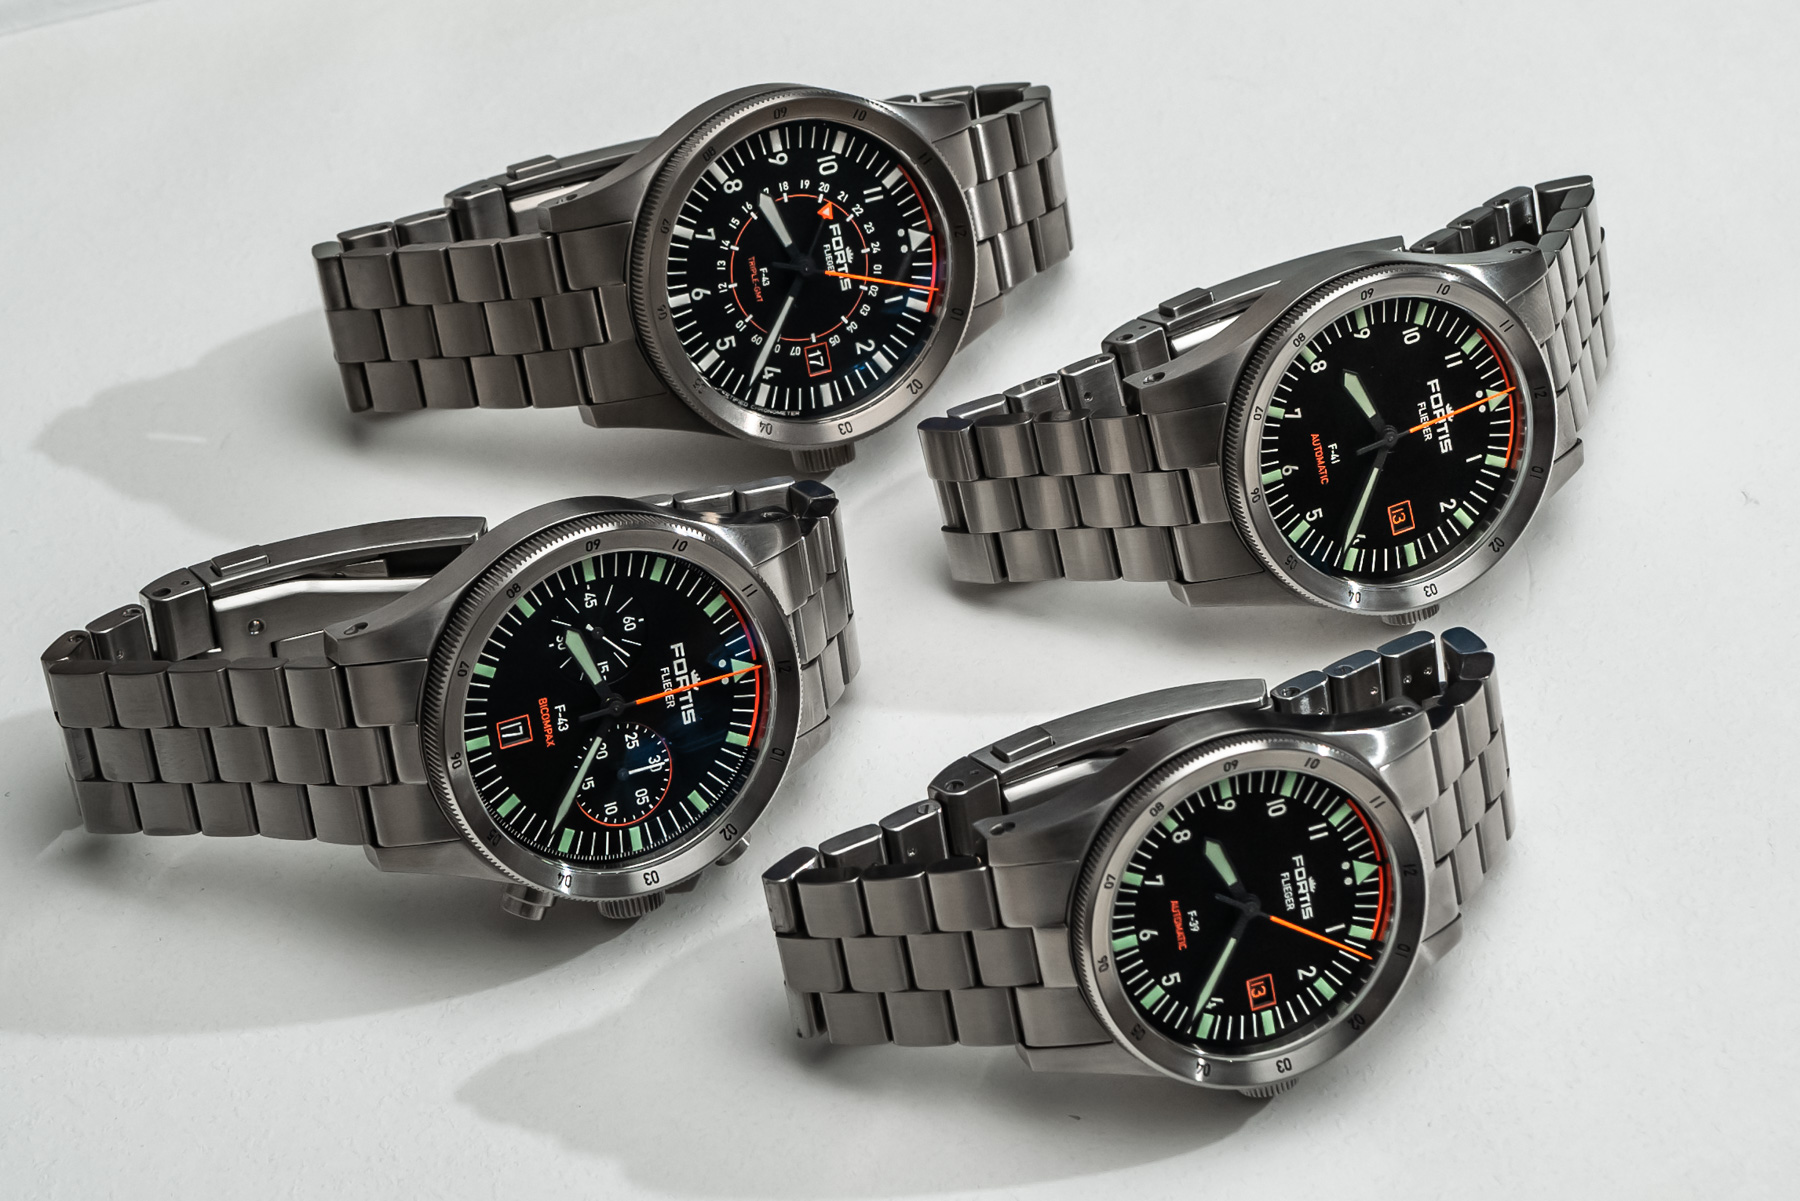 Hands-On: The Fortis Flieger Watch Collection